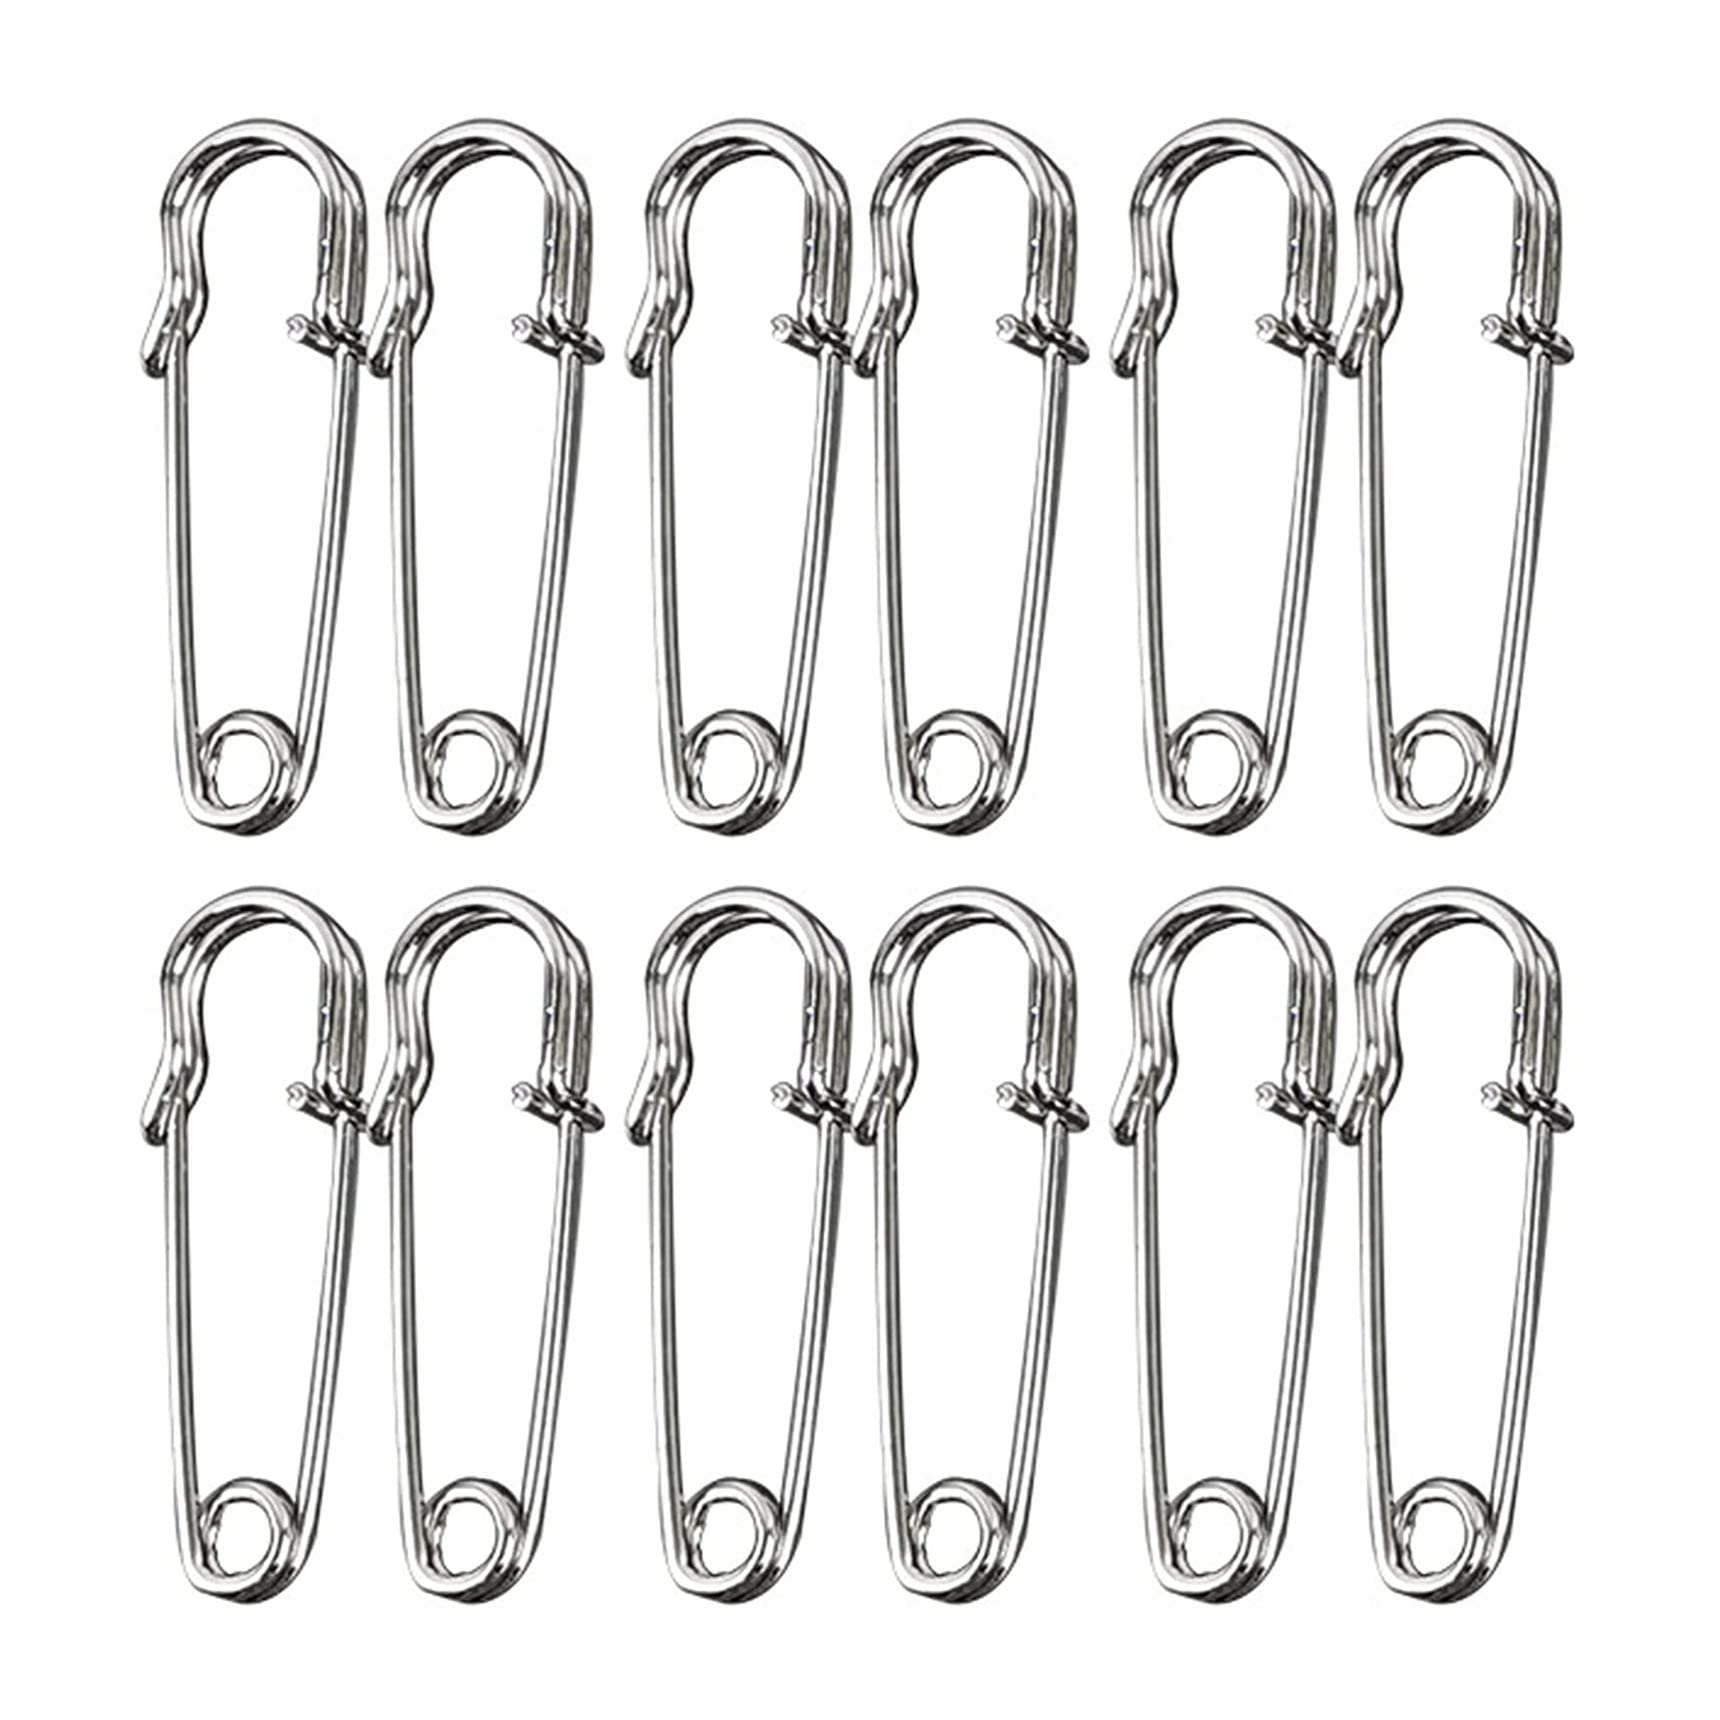 Large Safety Pins Large Safety Pins Heavy Duty Safety Pins for Clothes ...